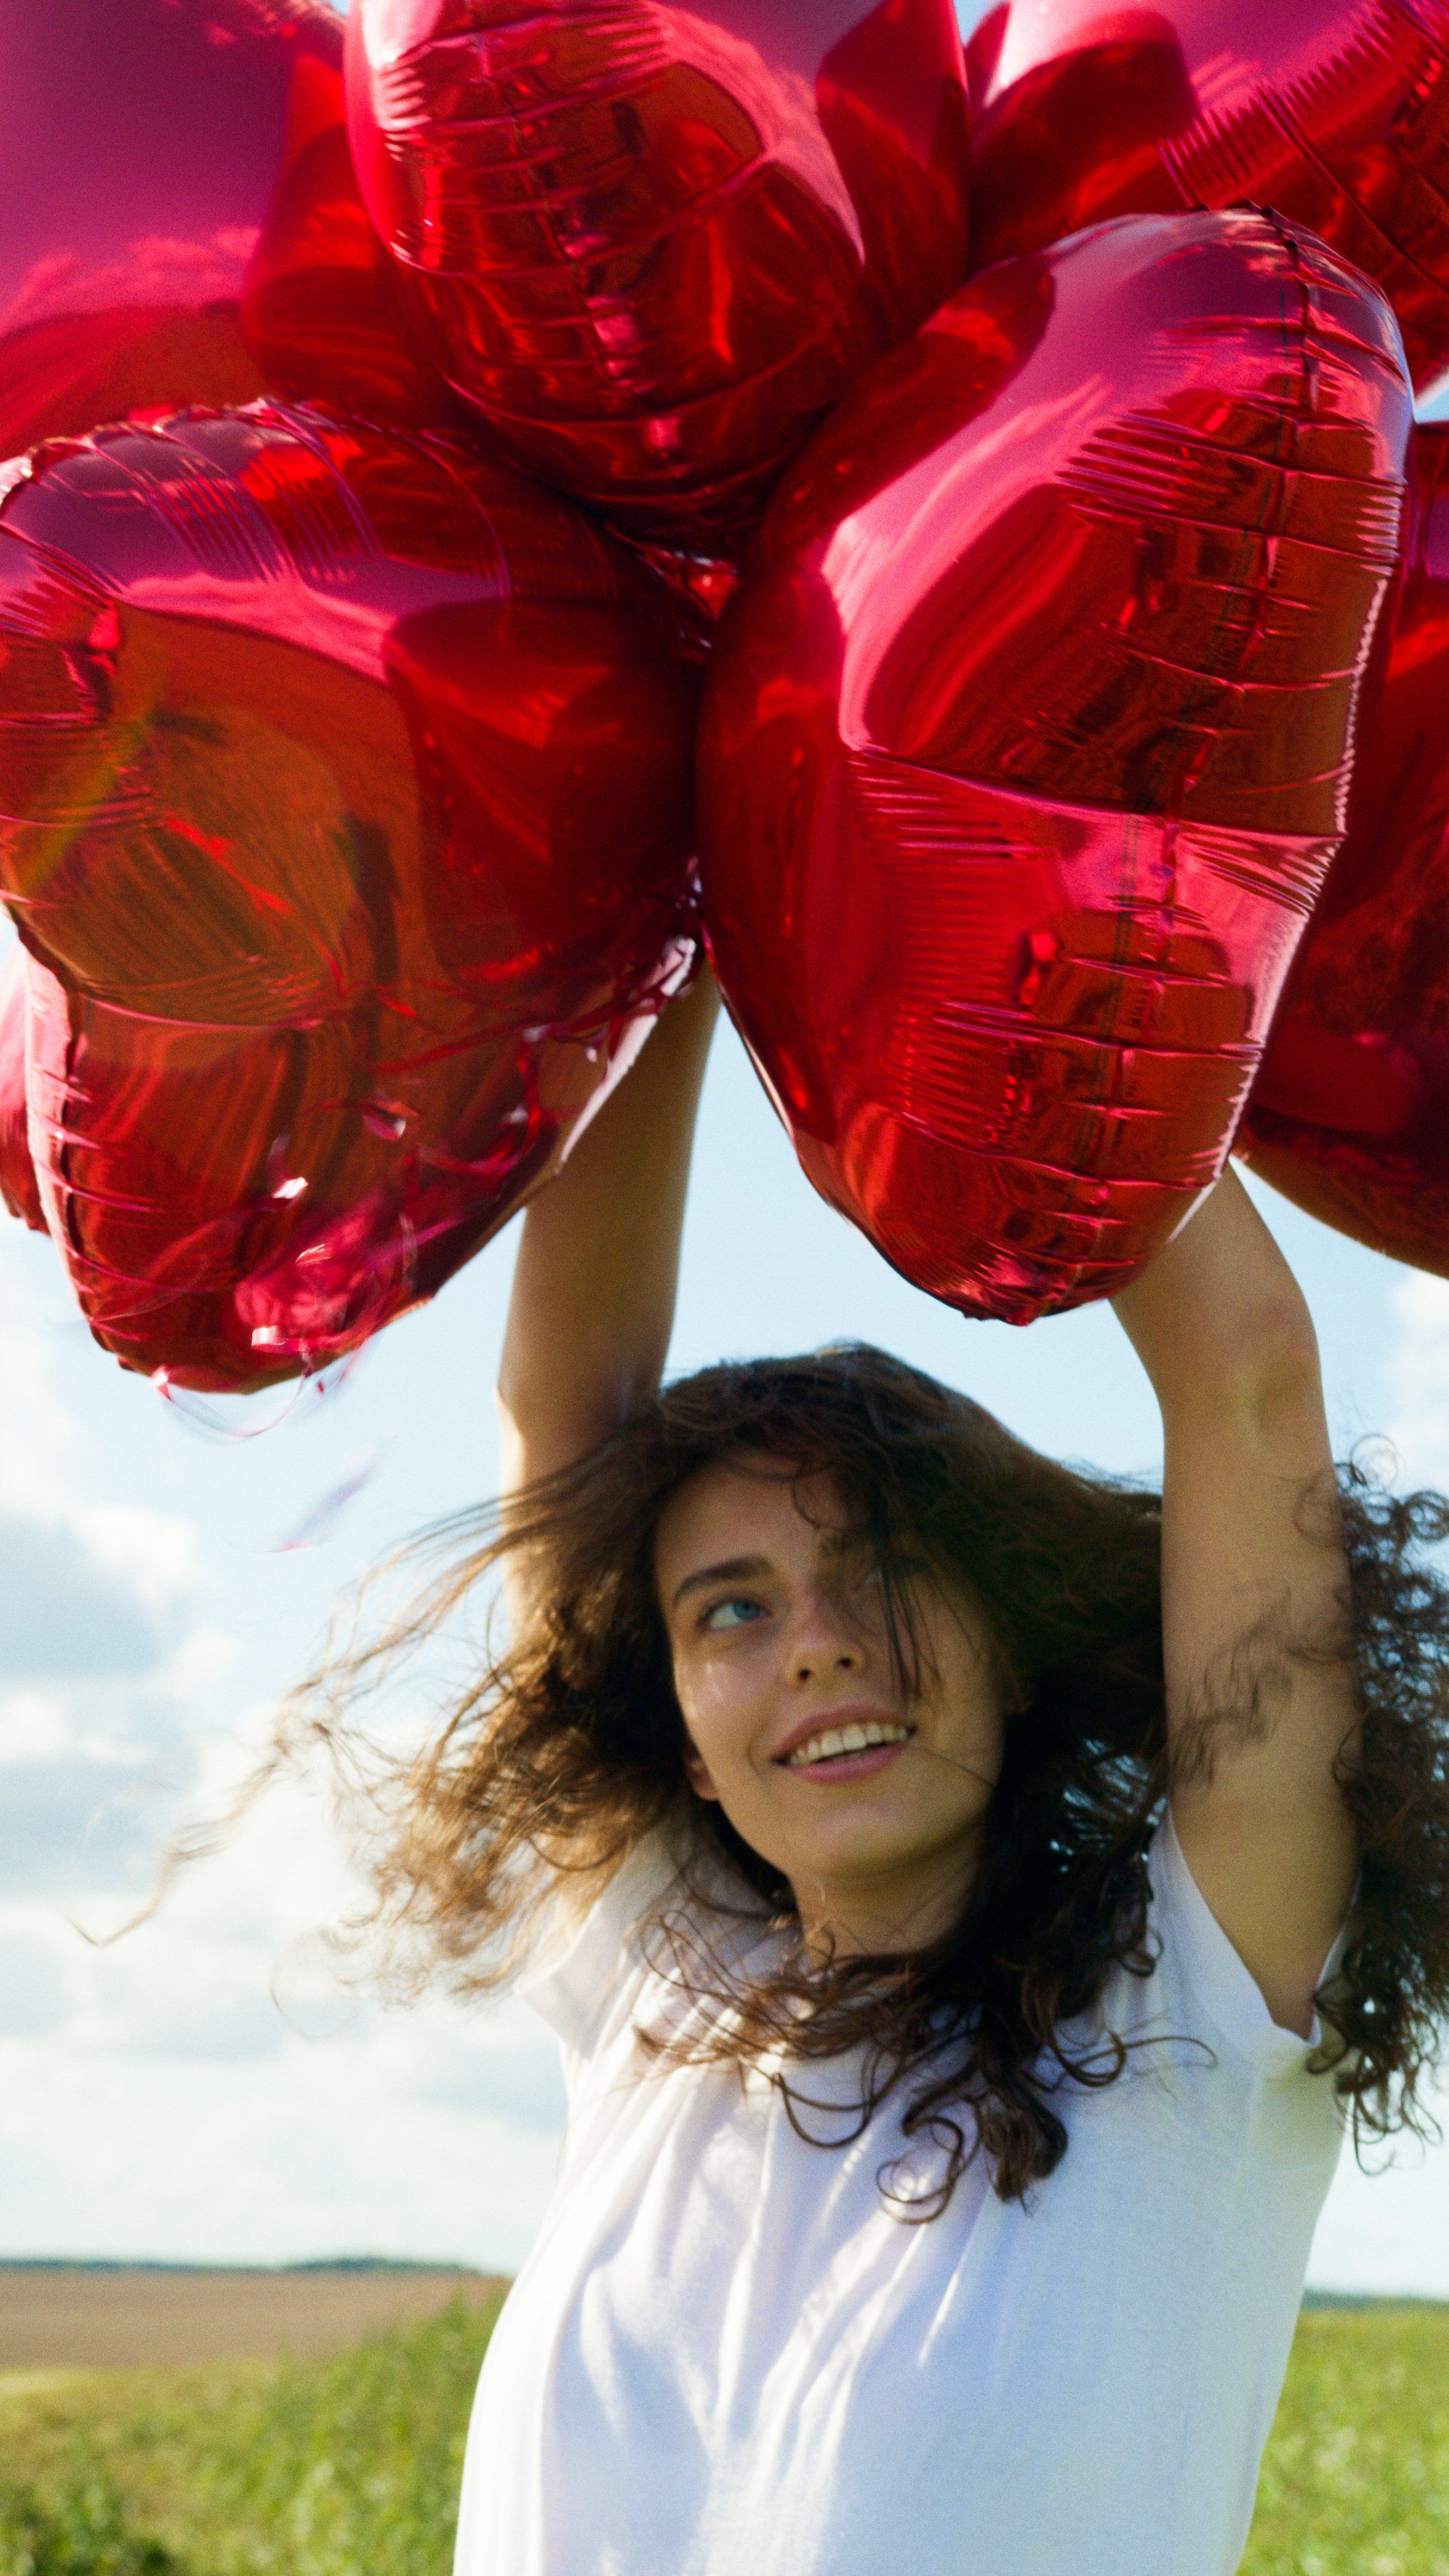 Woman with Heart Baloons